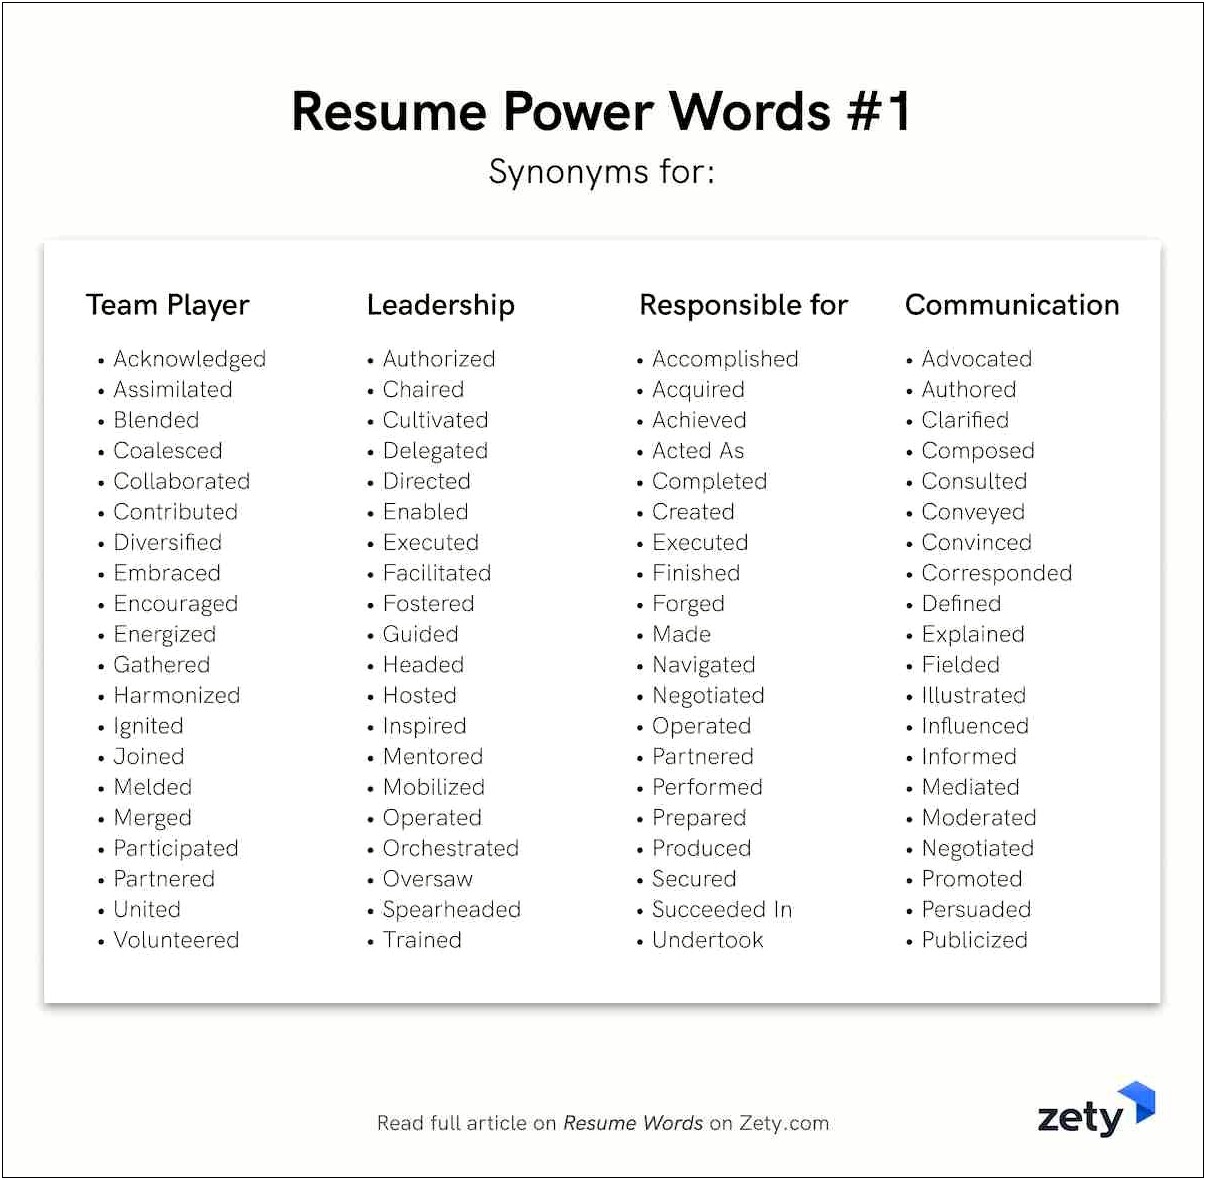 Resume Words For Learning Every Day